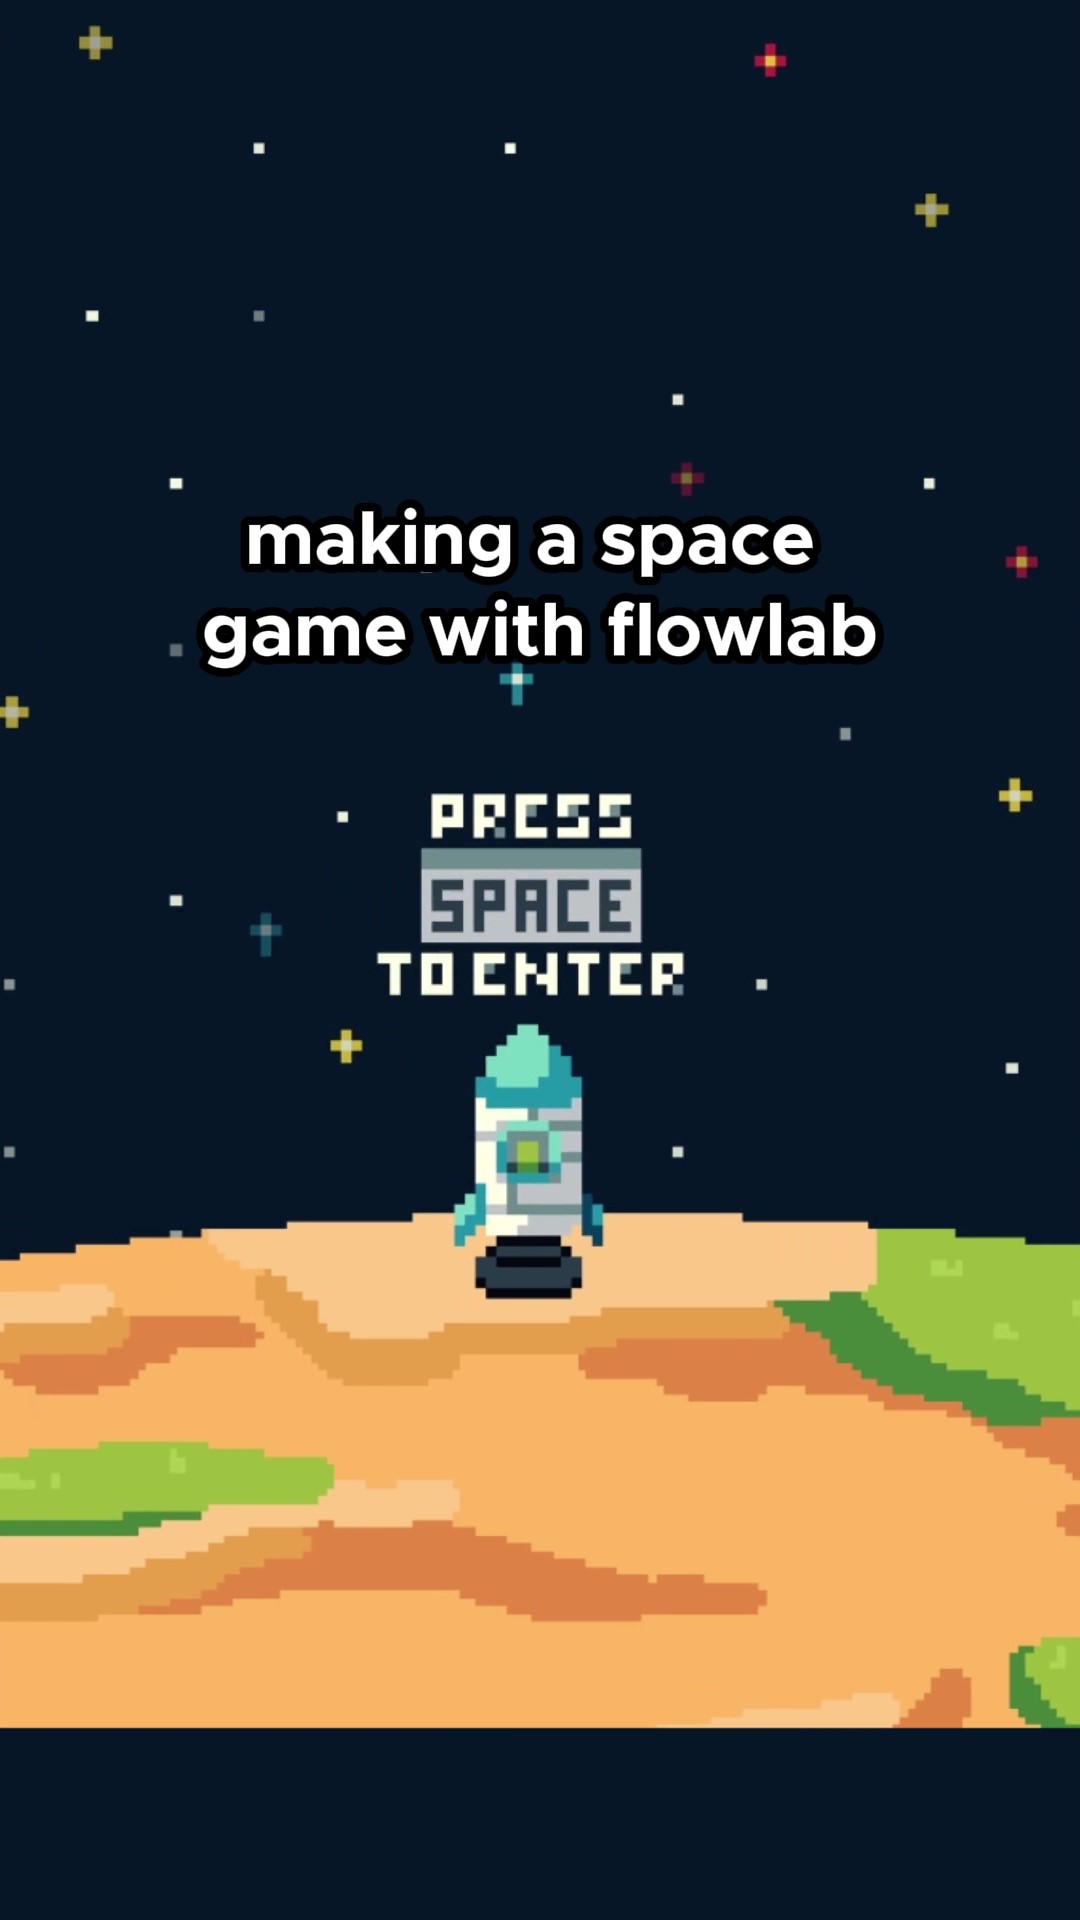 Flowlab No-code Game Engine - making a space game with Flowlab